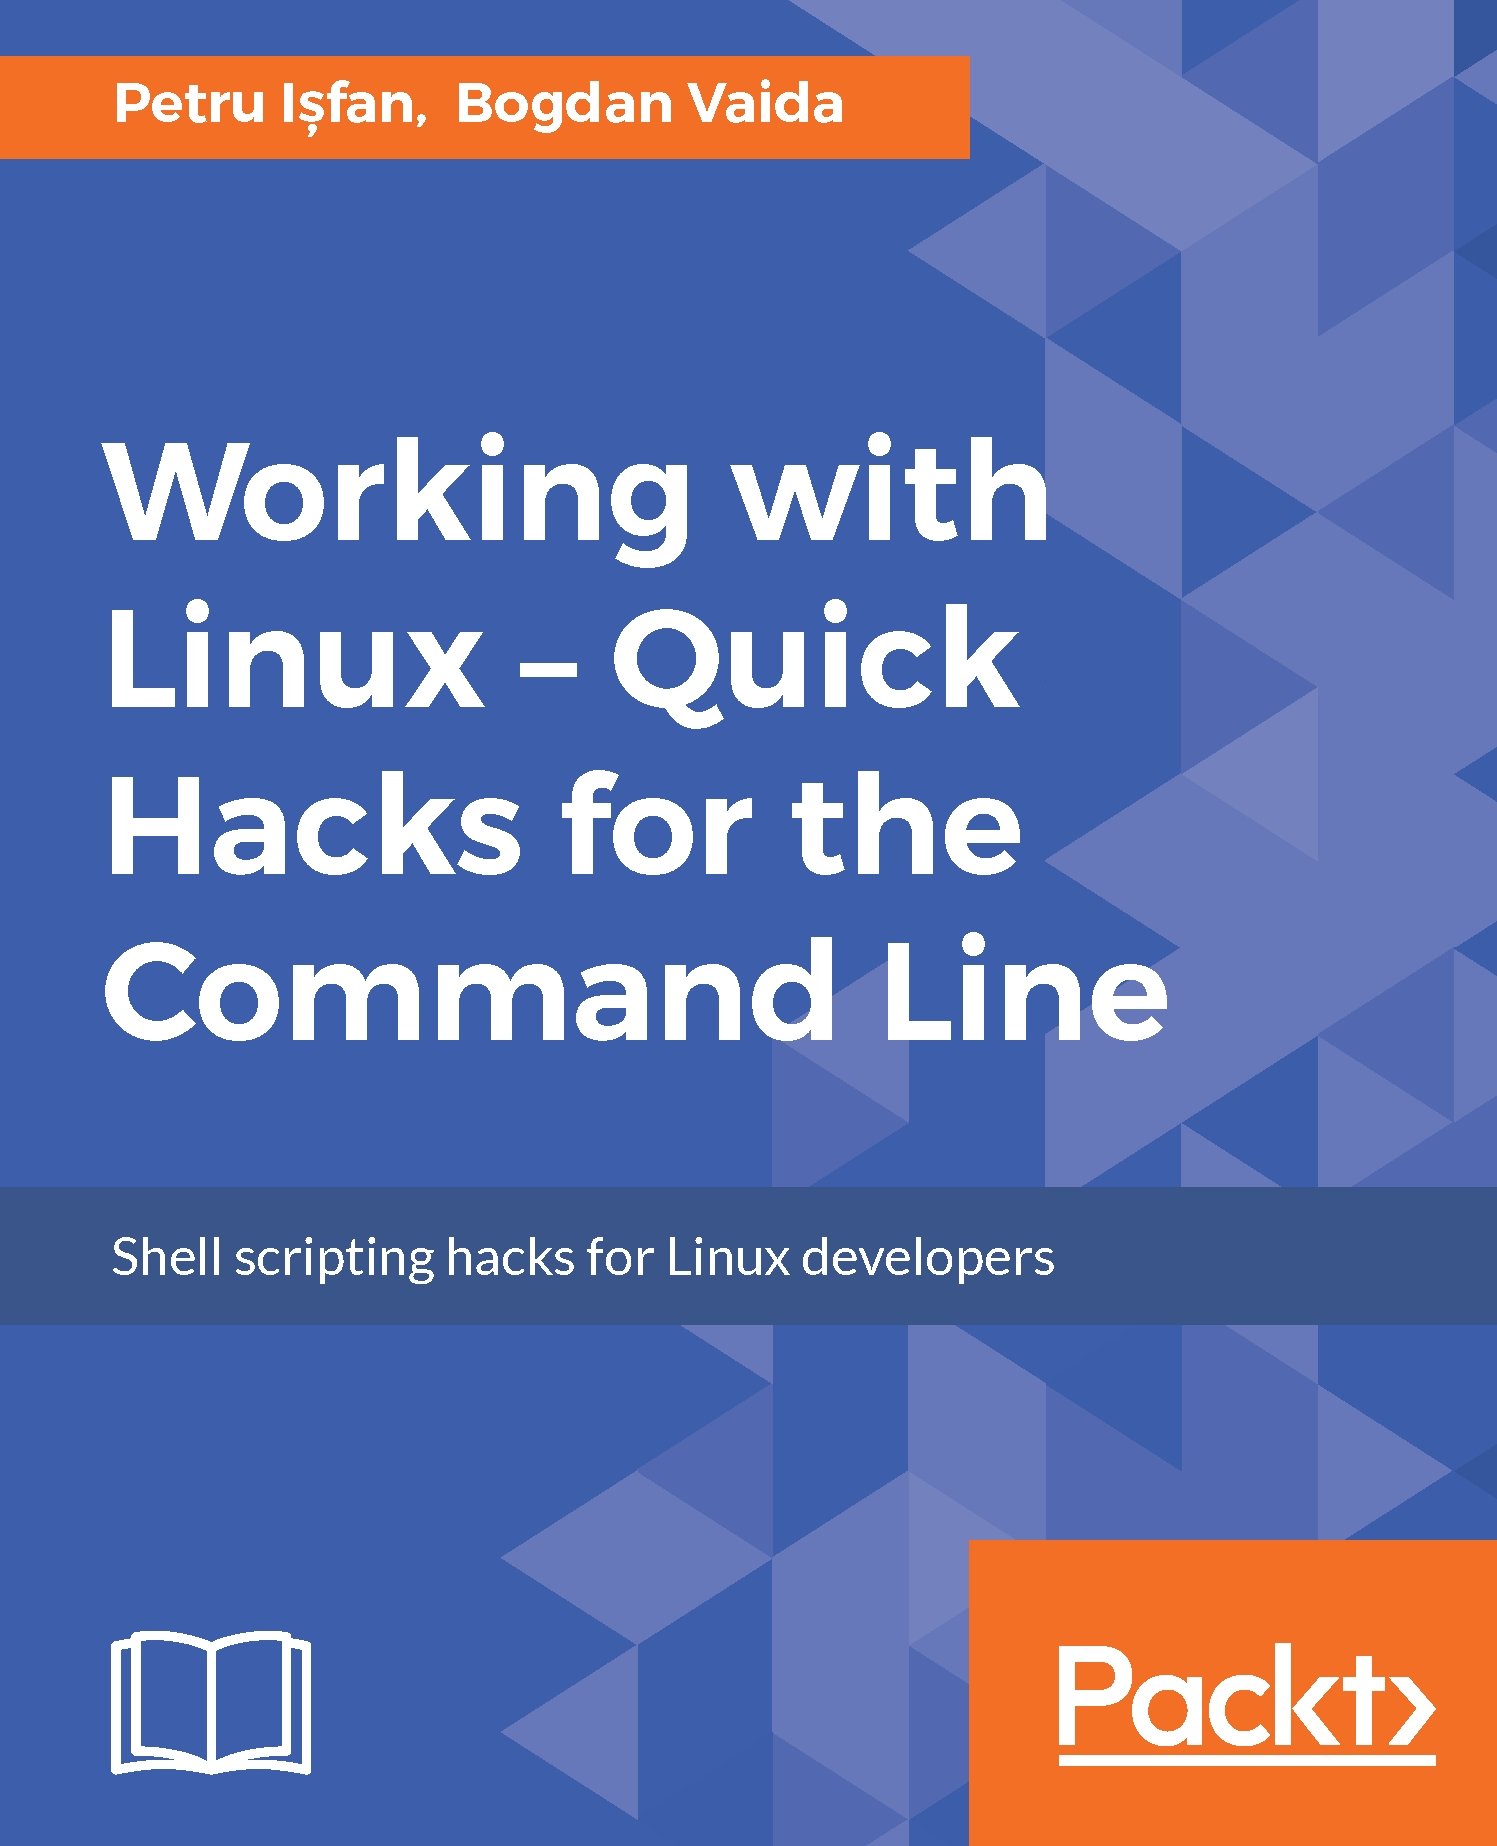 Working with Linux ??? Quick Hacks for the Command Line